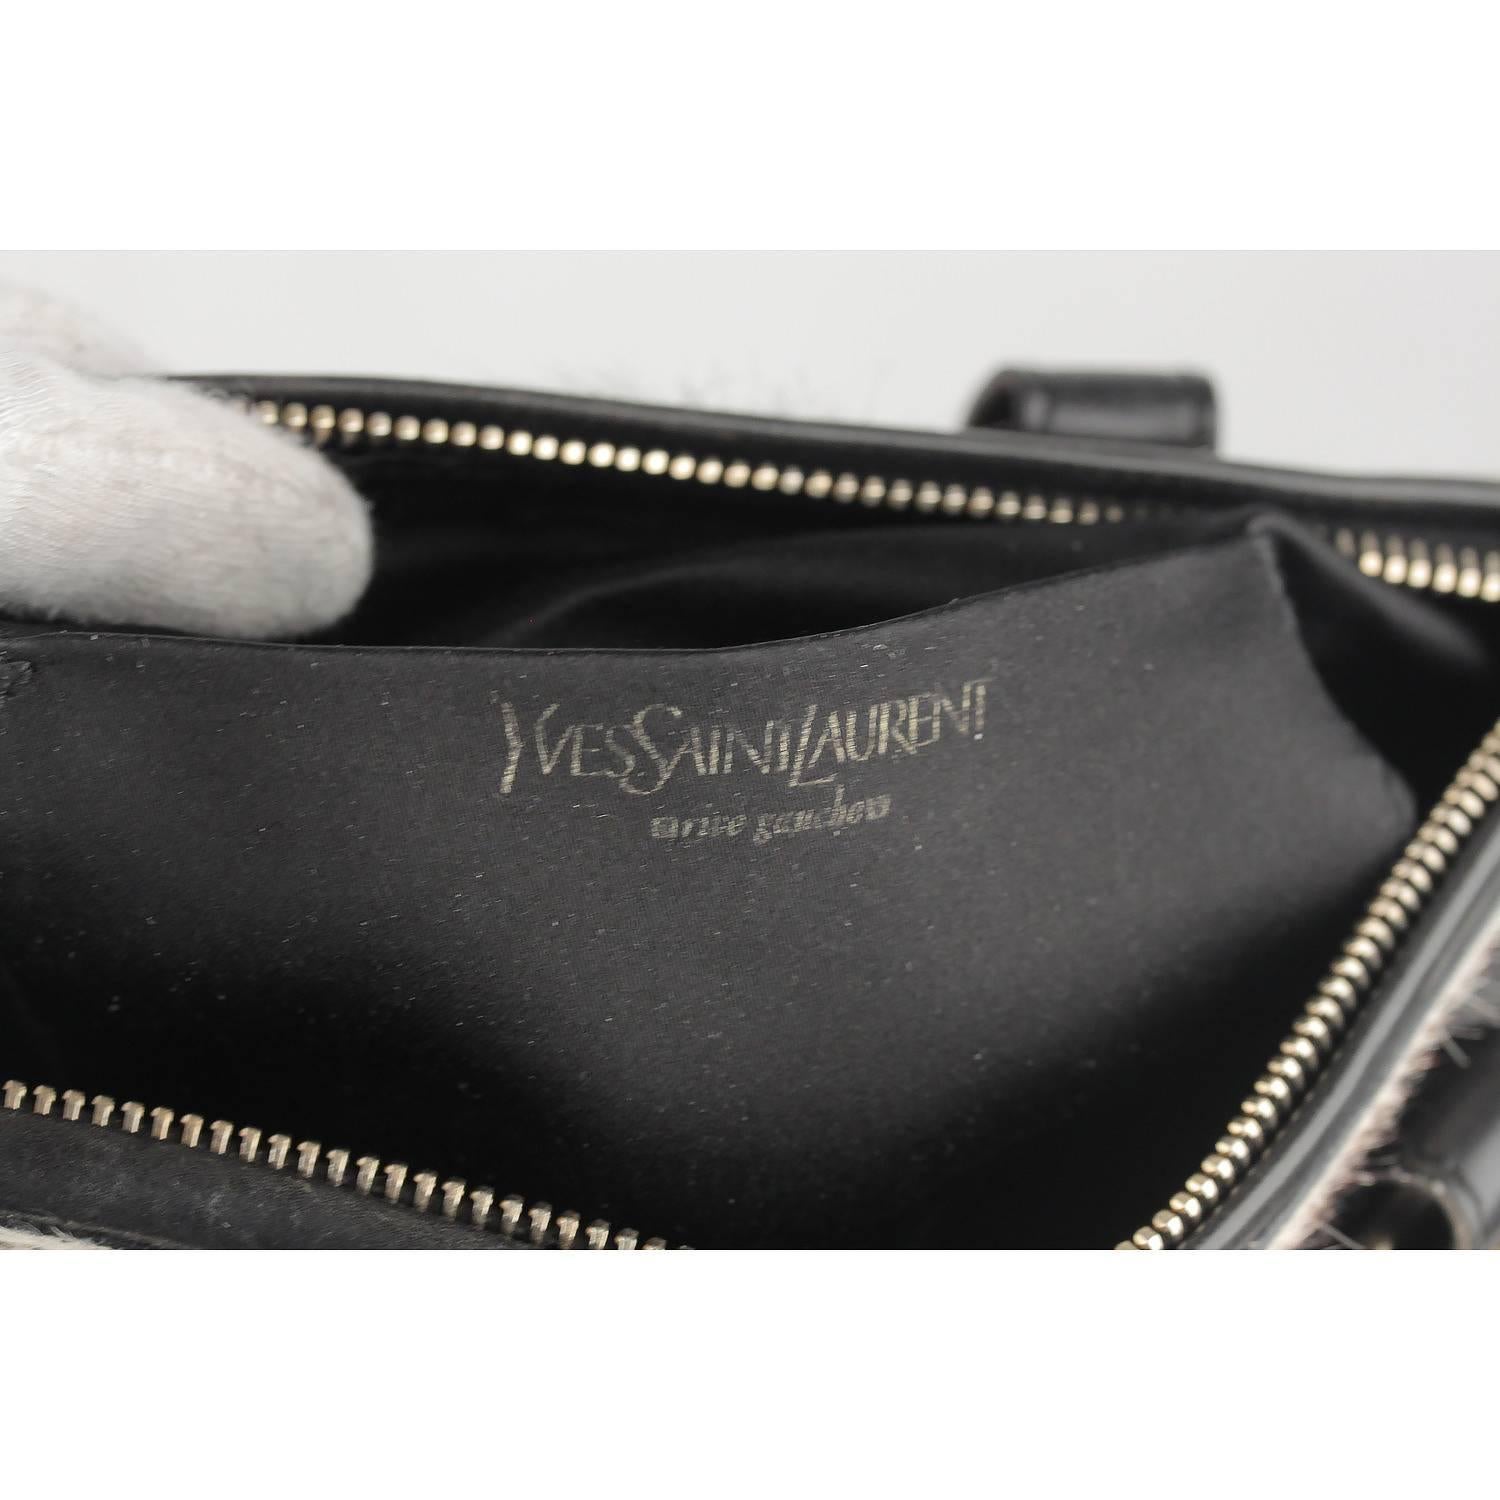 - Yves Saint Laurent Black leather shoulder bag with pony hair panels
- Features  gold metal hardware on the front and on the back
- Double flat leather handles
- Upper zipper closure
- Black satin lining
- 1 side open pocket inside
- Four